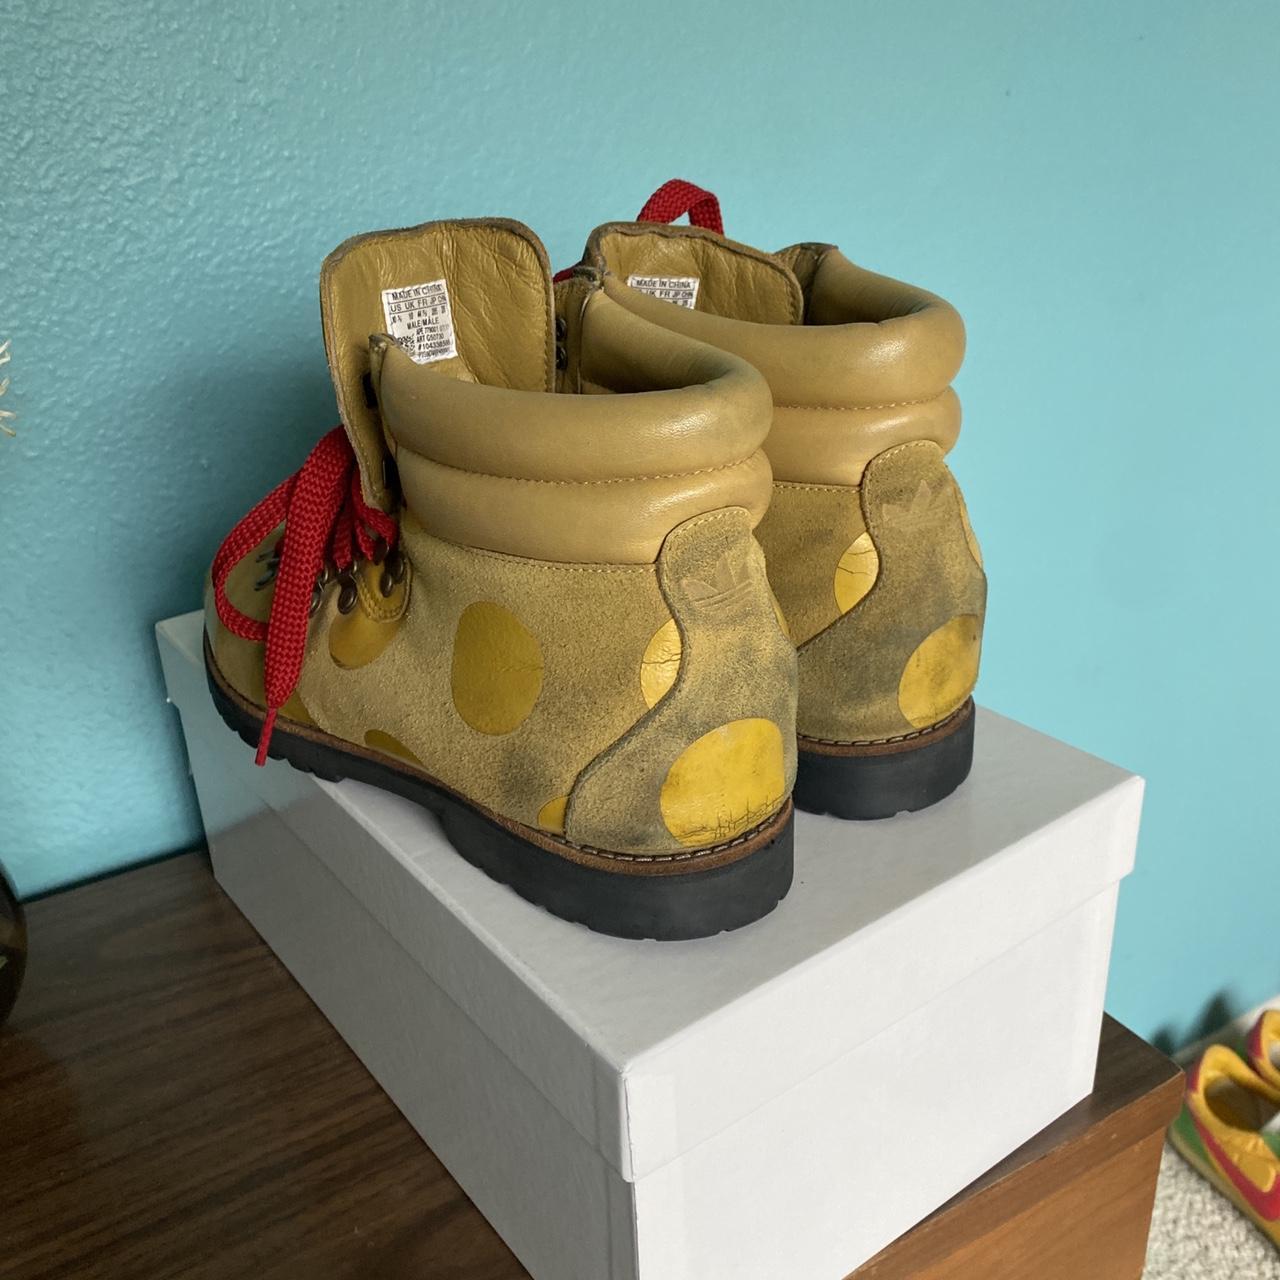 Jeremy Scott Men's Red and Yellow Boots (3)